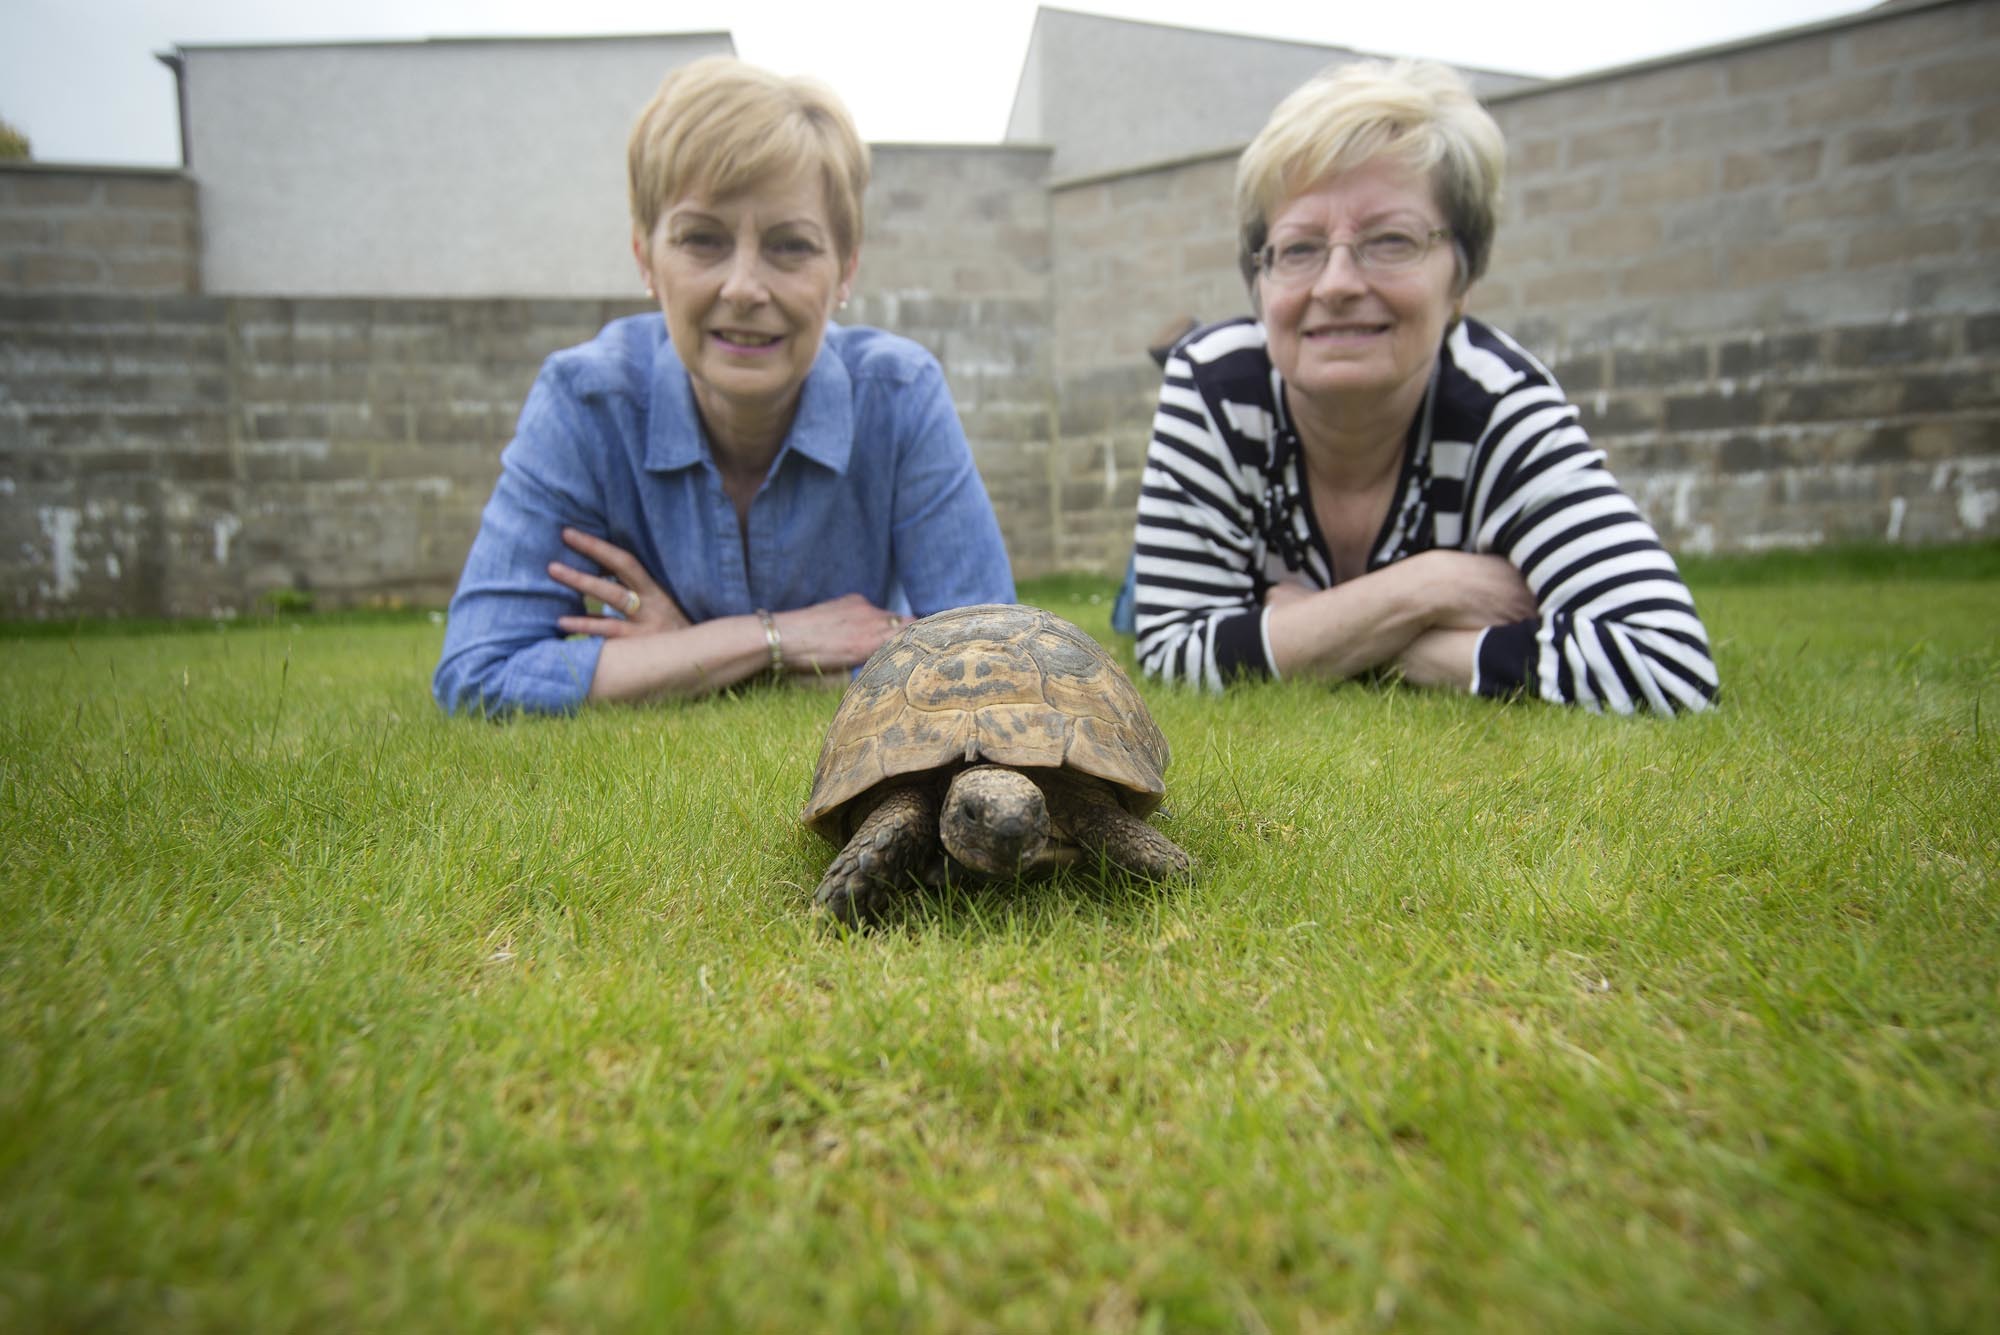 Twins Angela Russell-Taylor and Jacqueline Hall with Timmy the Tortoise, 50 years after they snapped him up for the princely sum of 37p.